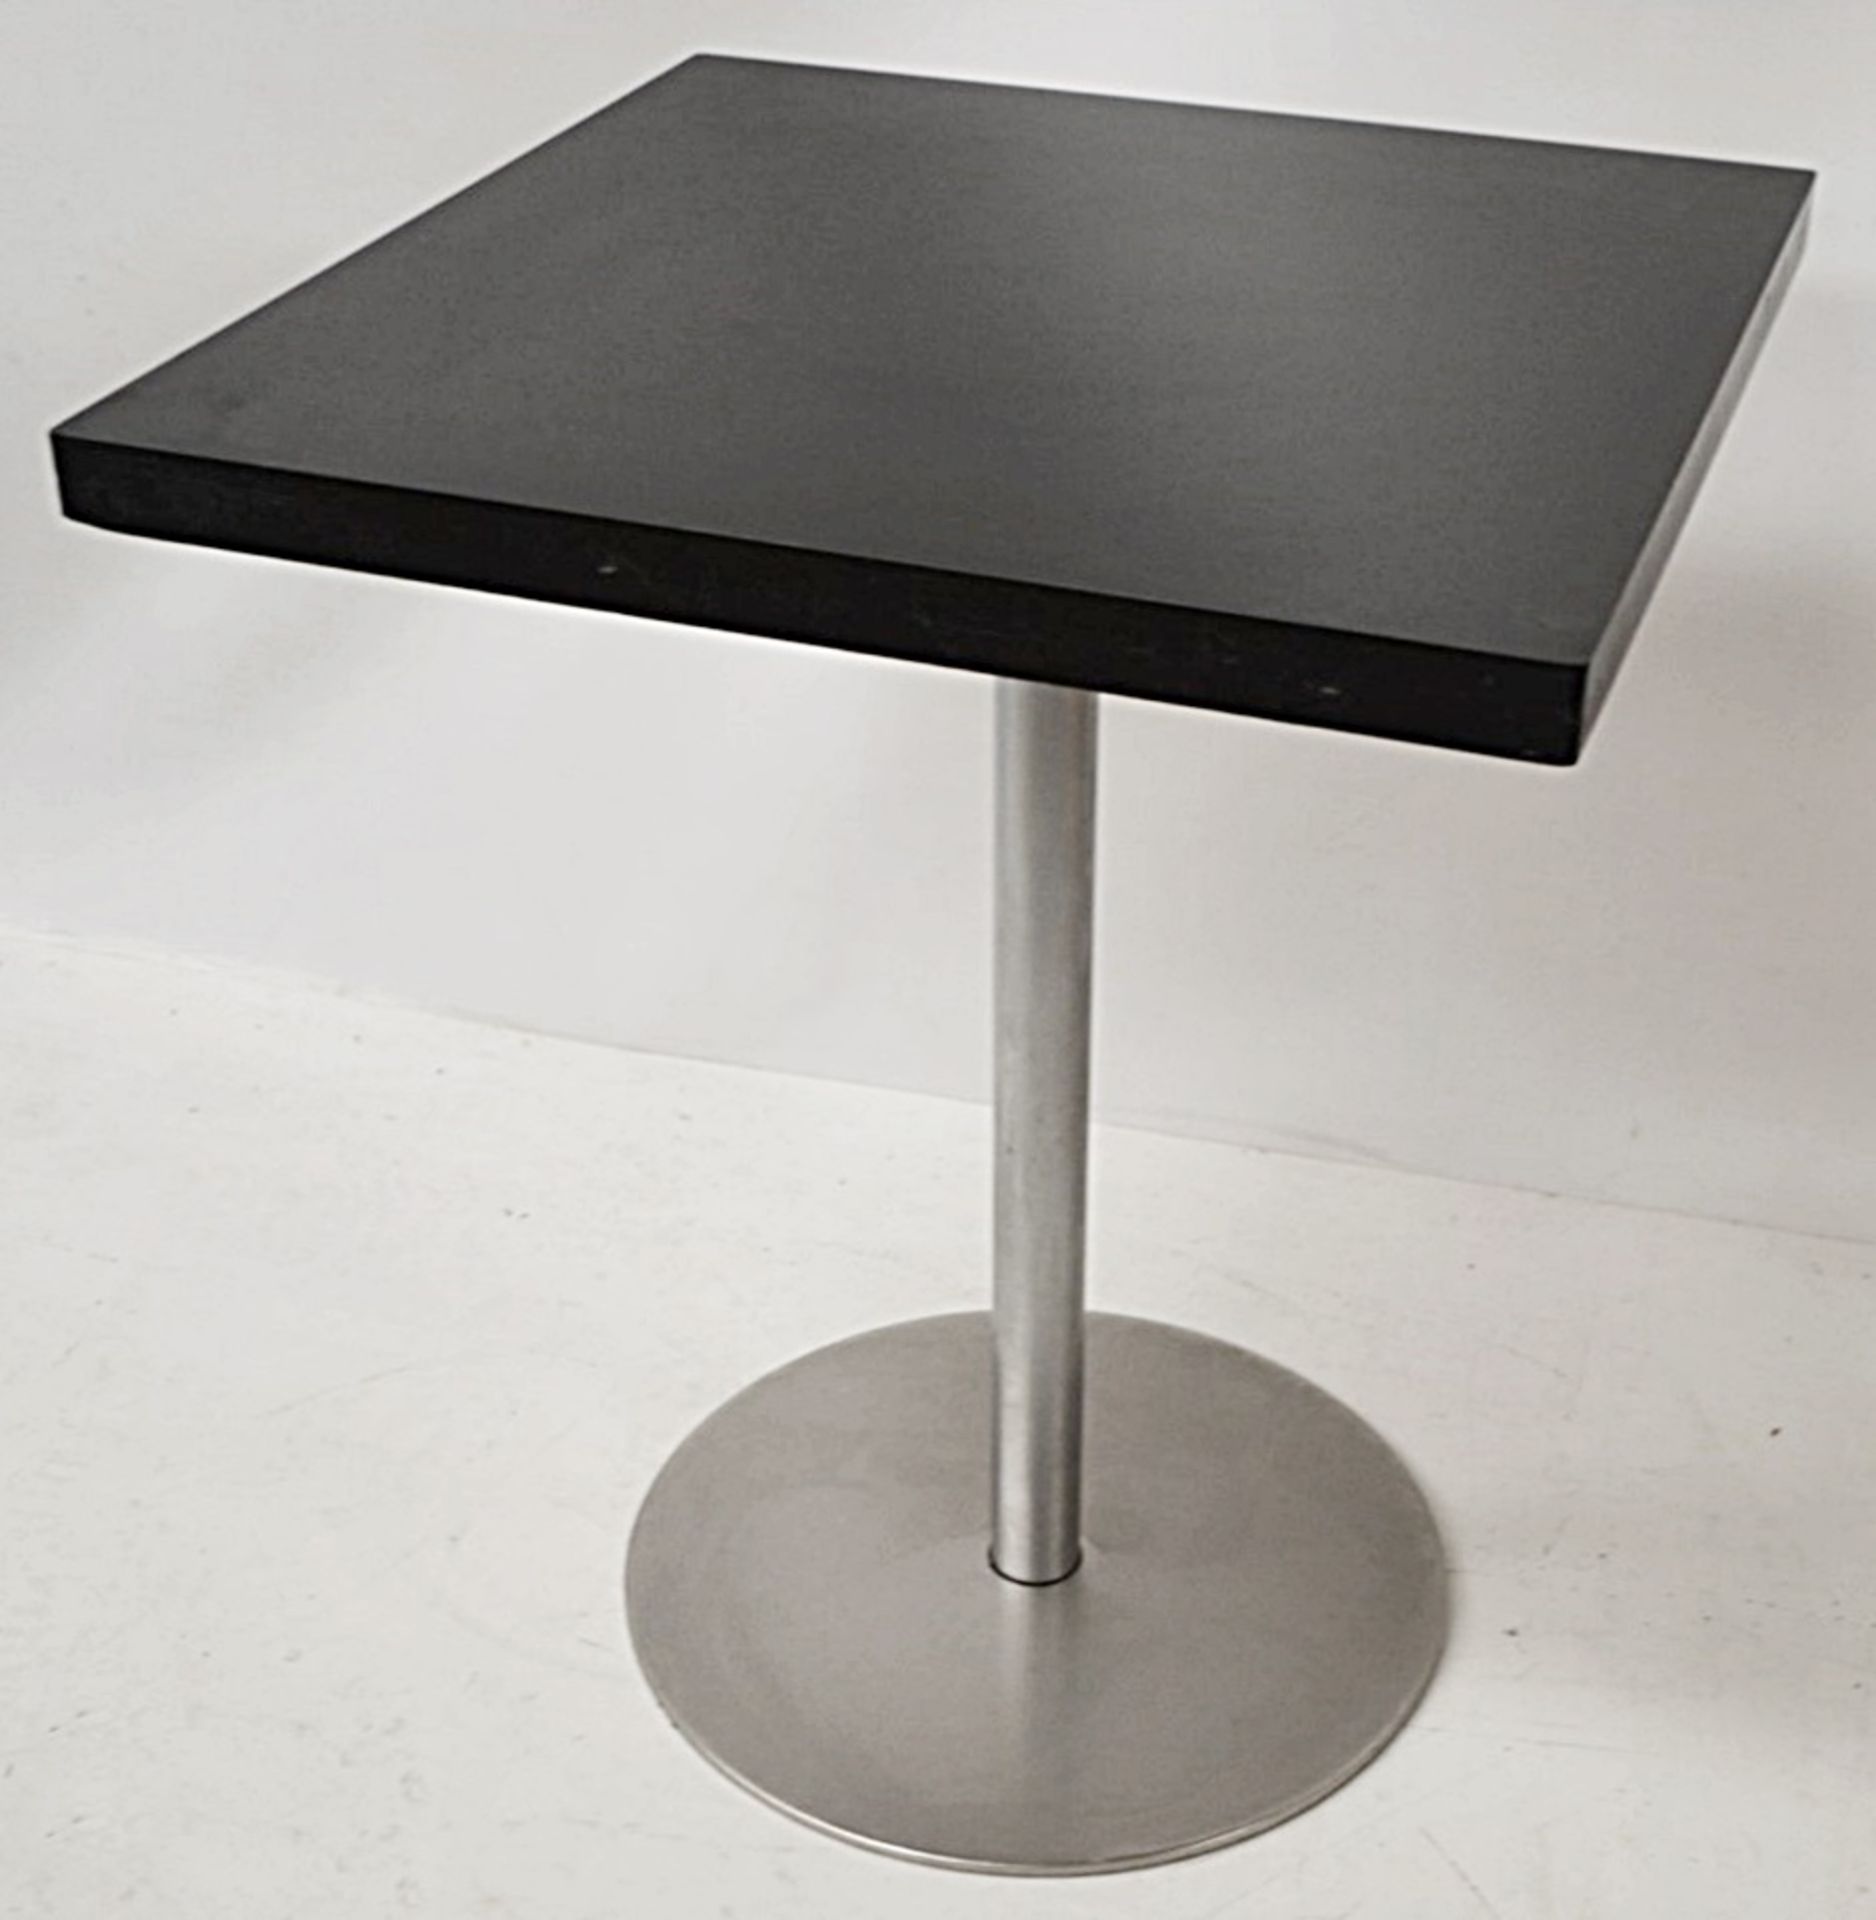 5 x Square Black Indoor Cafe Bistro Tables with Chrome Bases - Dimensions: 60 x 60 x Height 74cm - Image 4 of 4